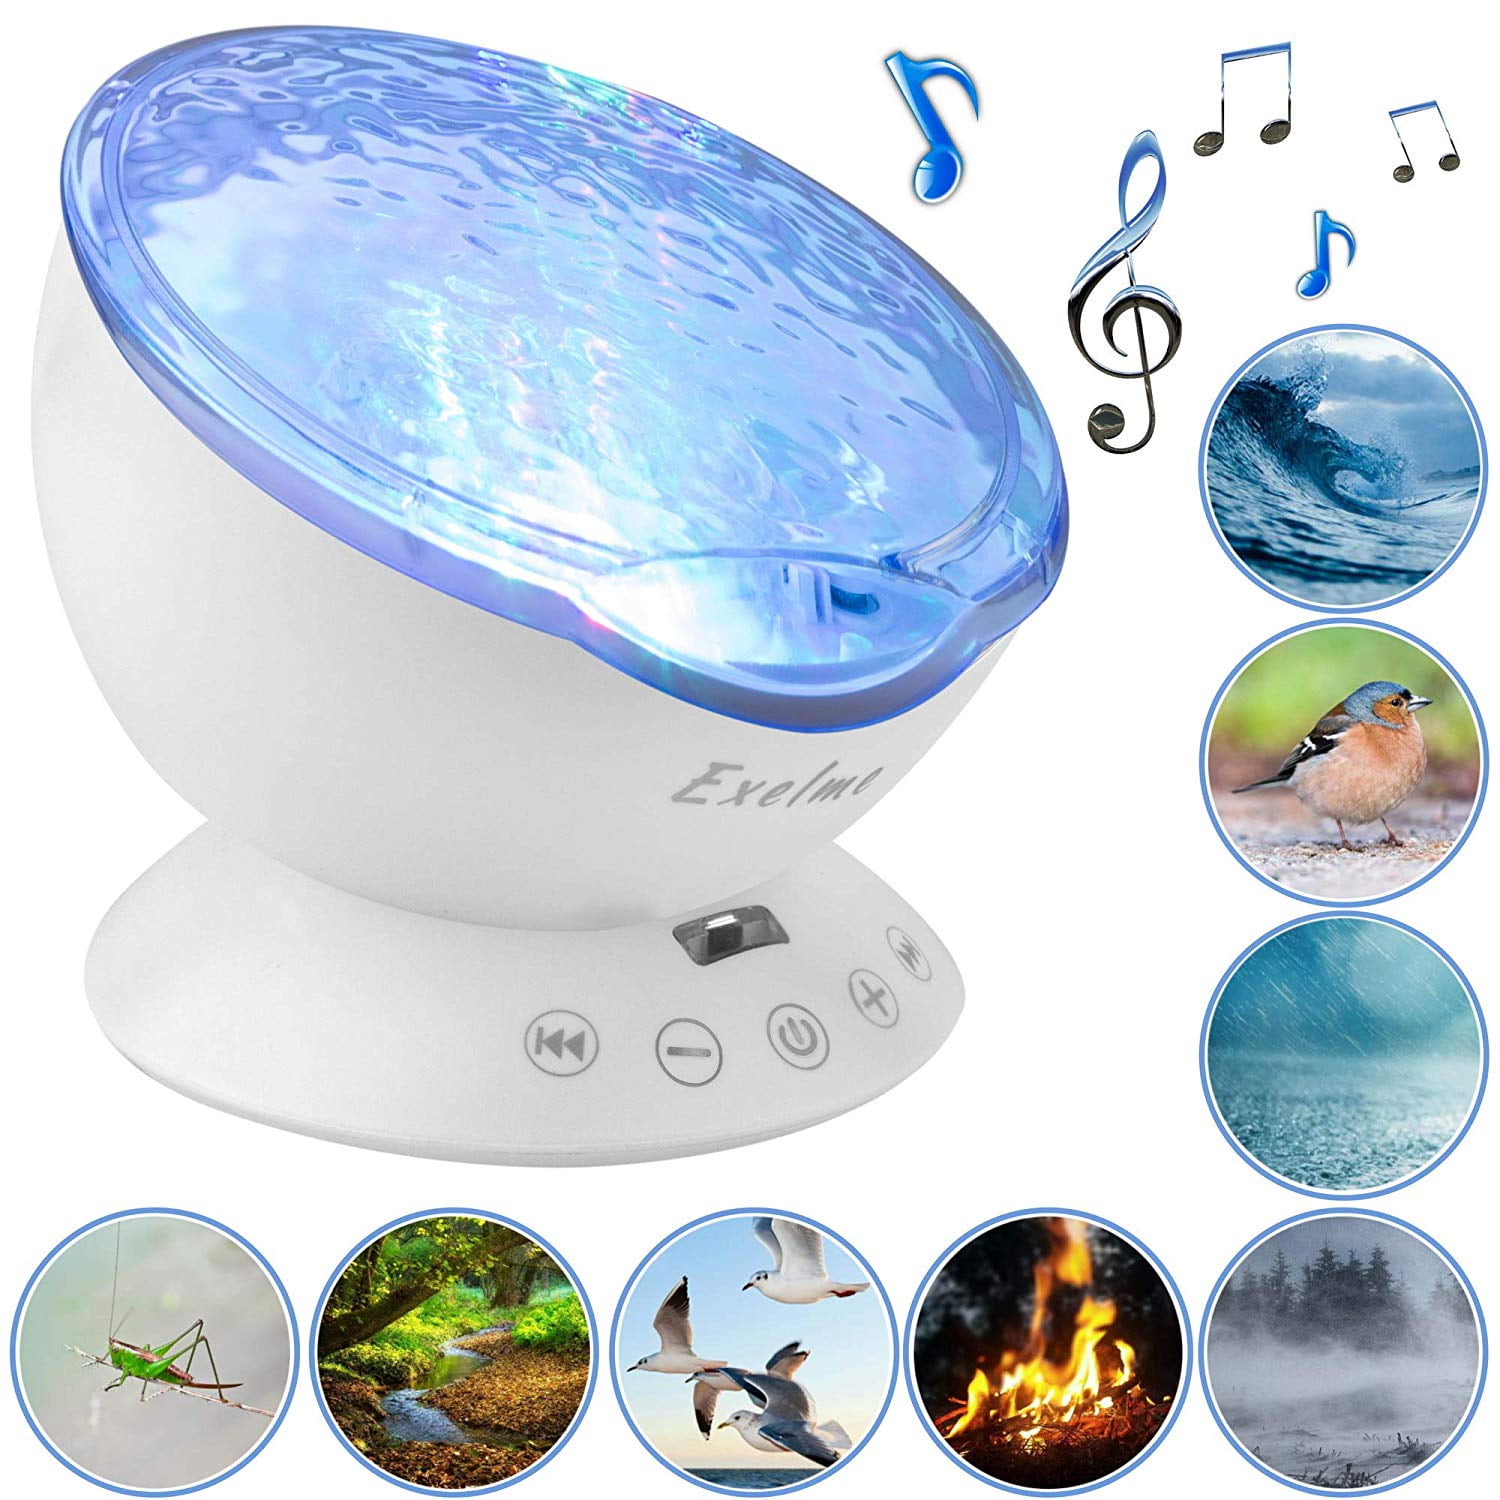 Calming Sensory LED Projector Night Lights Ocean Wave Relax Music Lamp Kids Gift 